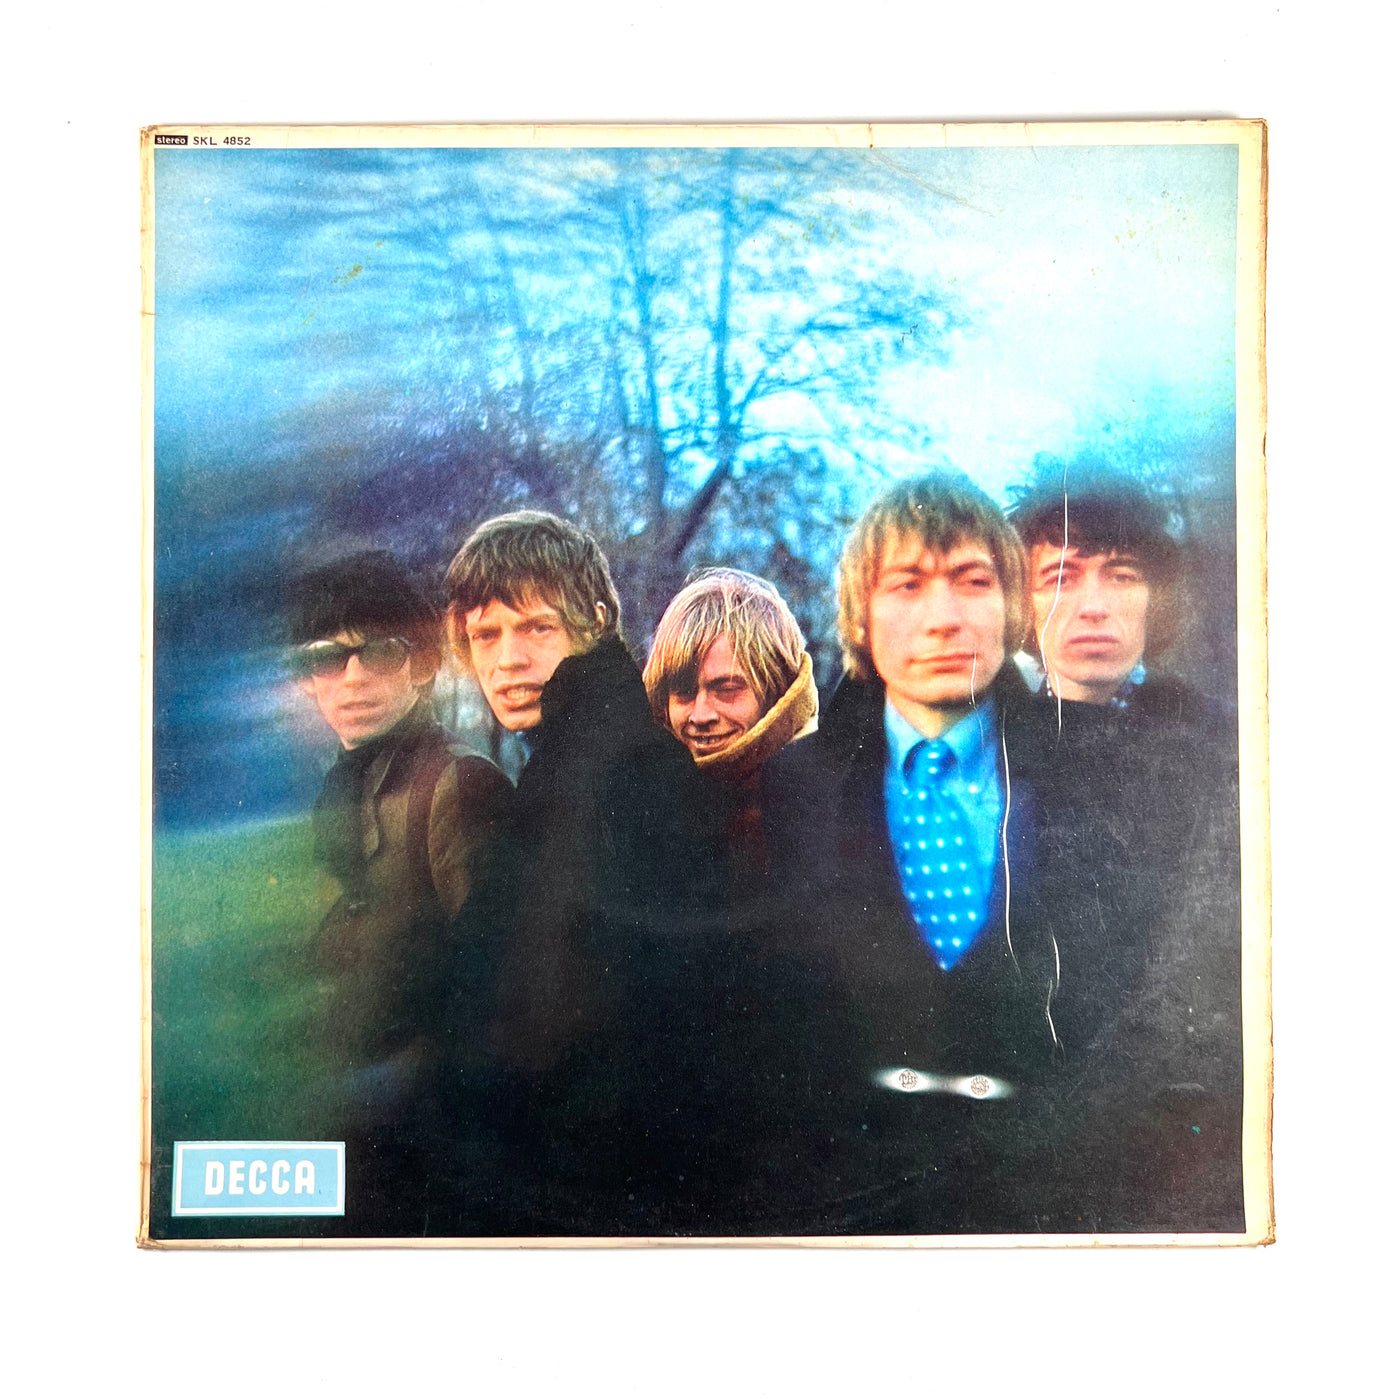 The Rolling Stones - Between The Buttons - 1967 UK Press